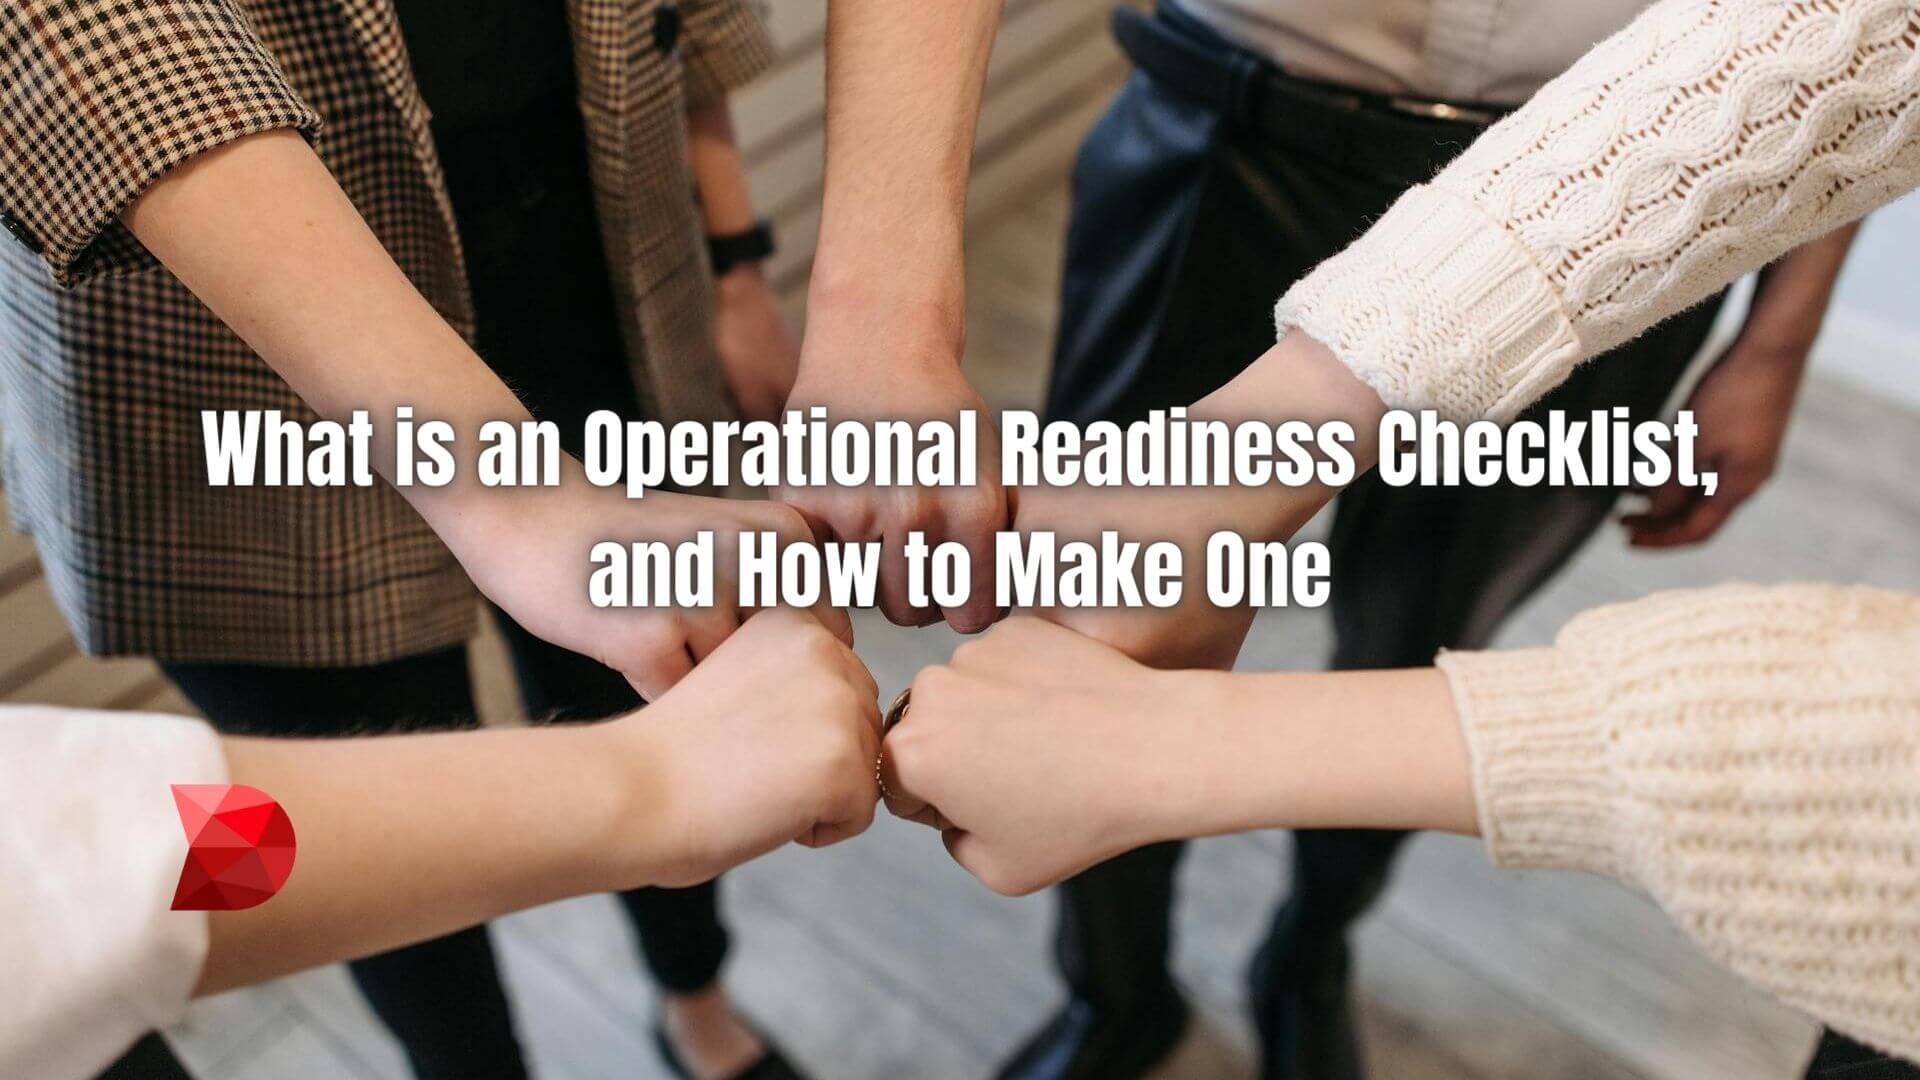 Unlock success with our guide to the operational readiness checklist. Learn the essential steps and best practices for seamless operations.